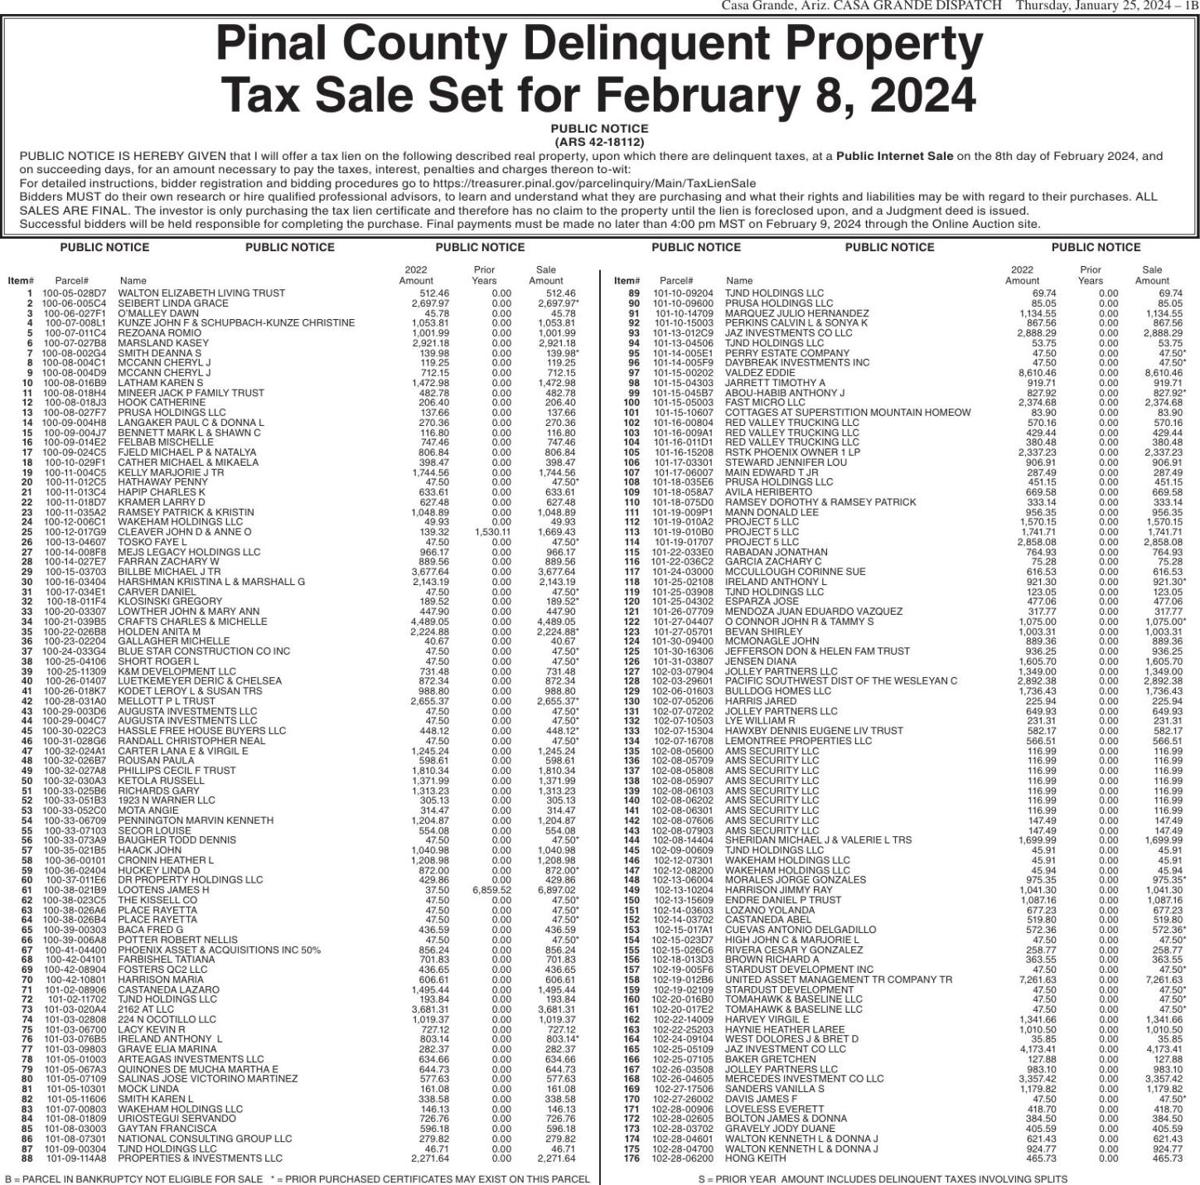 Pinal County Delinquent Tax Sale, 2024